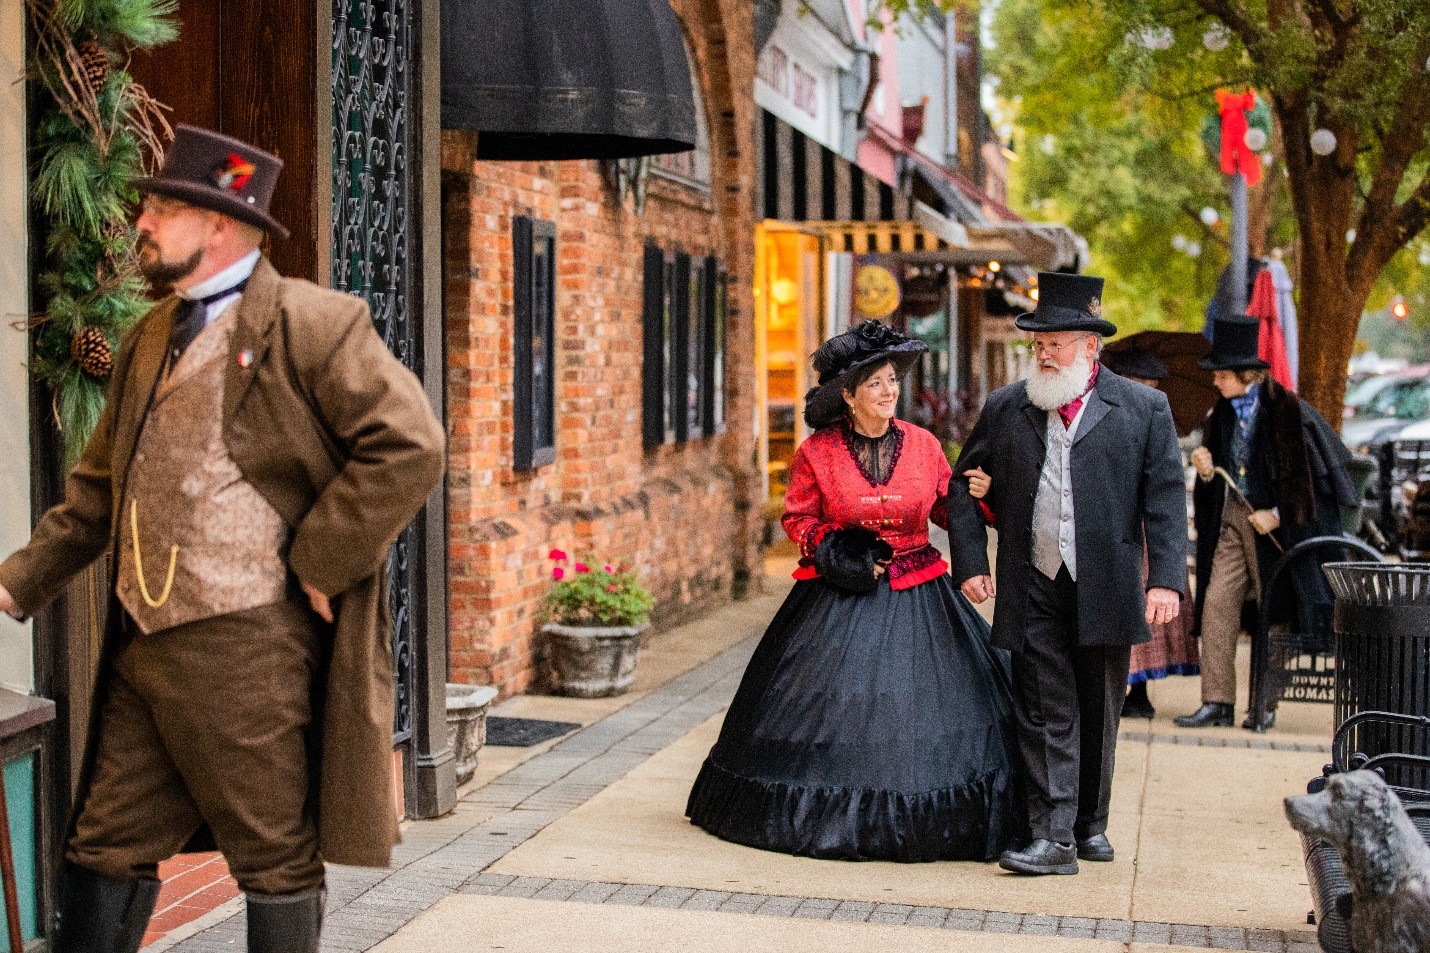 Photo for VICTORIAN CHRISTMAS COSTUME CLOSET OPEN TO THE PUBLIC